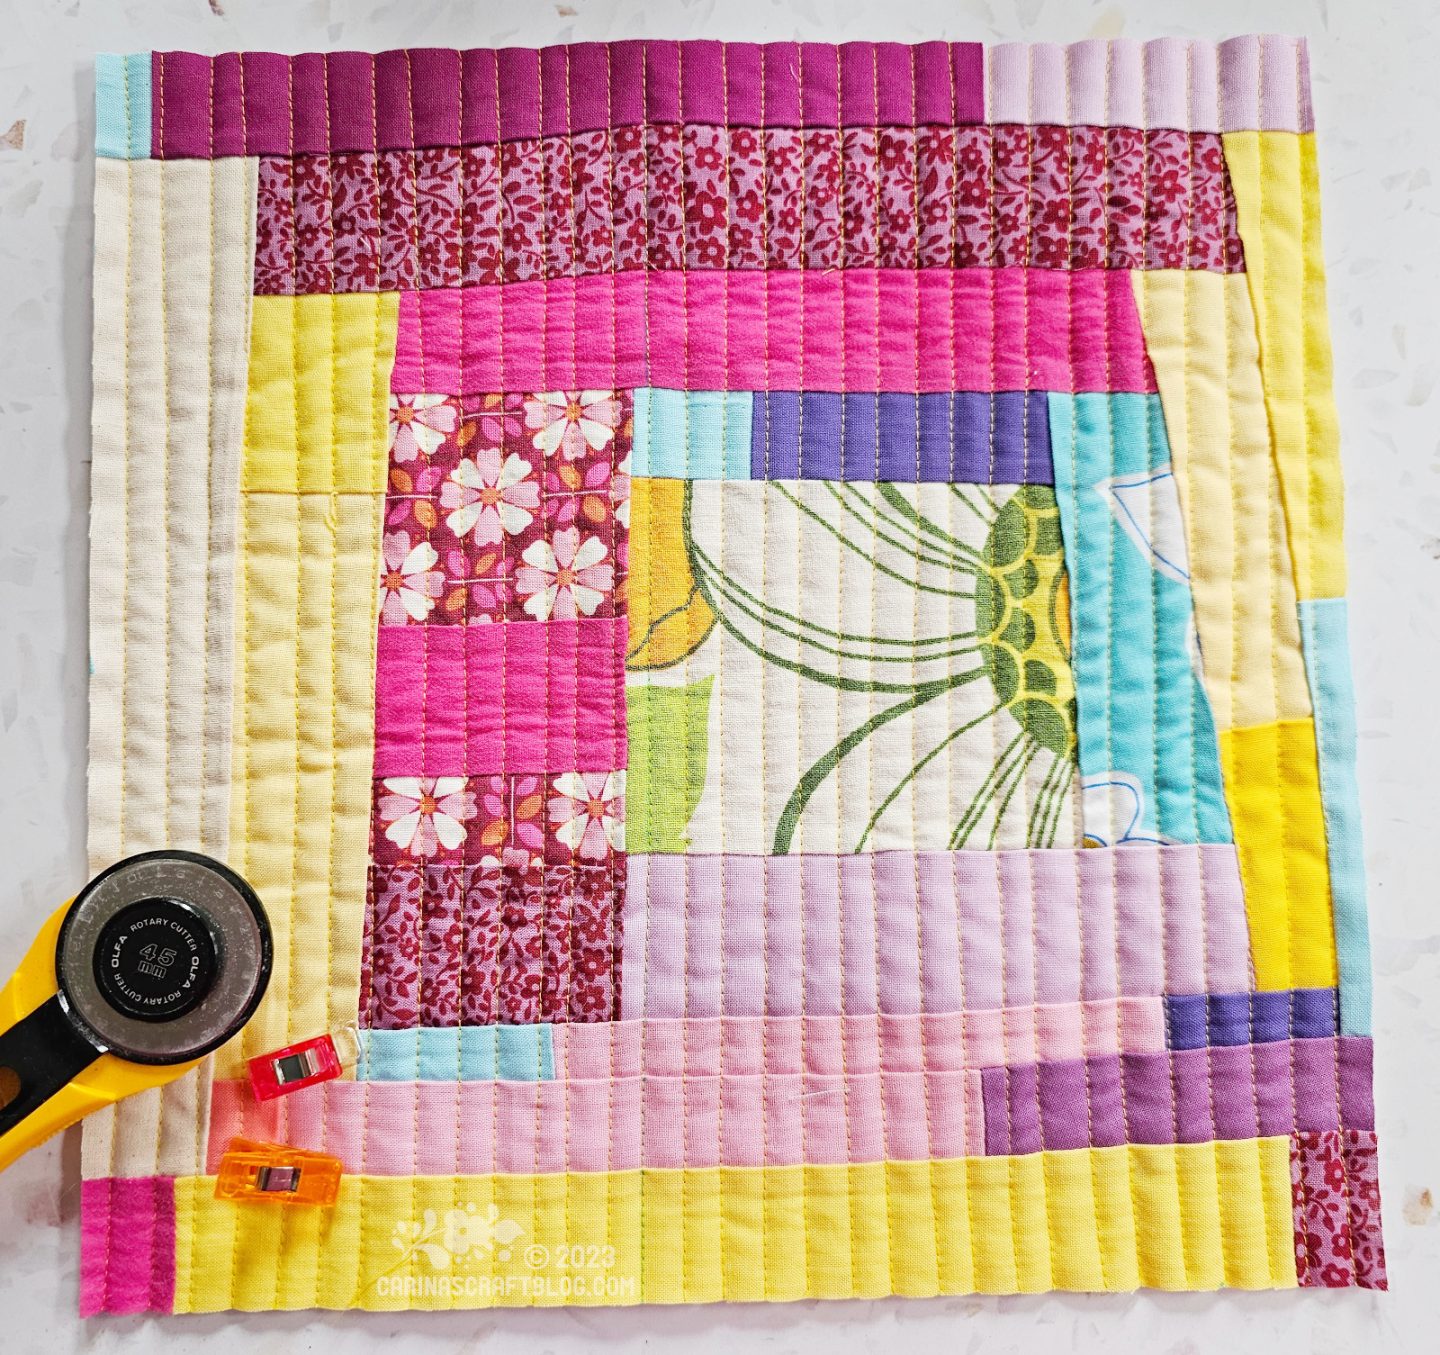 Small square quilt with a small white square in the centre, surrounded by strips of different thicknesses in mainly yellow, pink, purple and maroon colours.